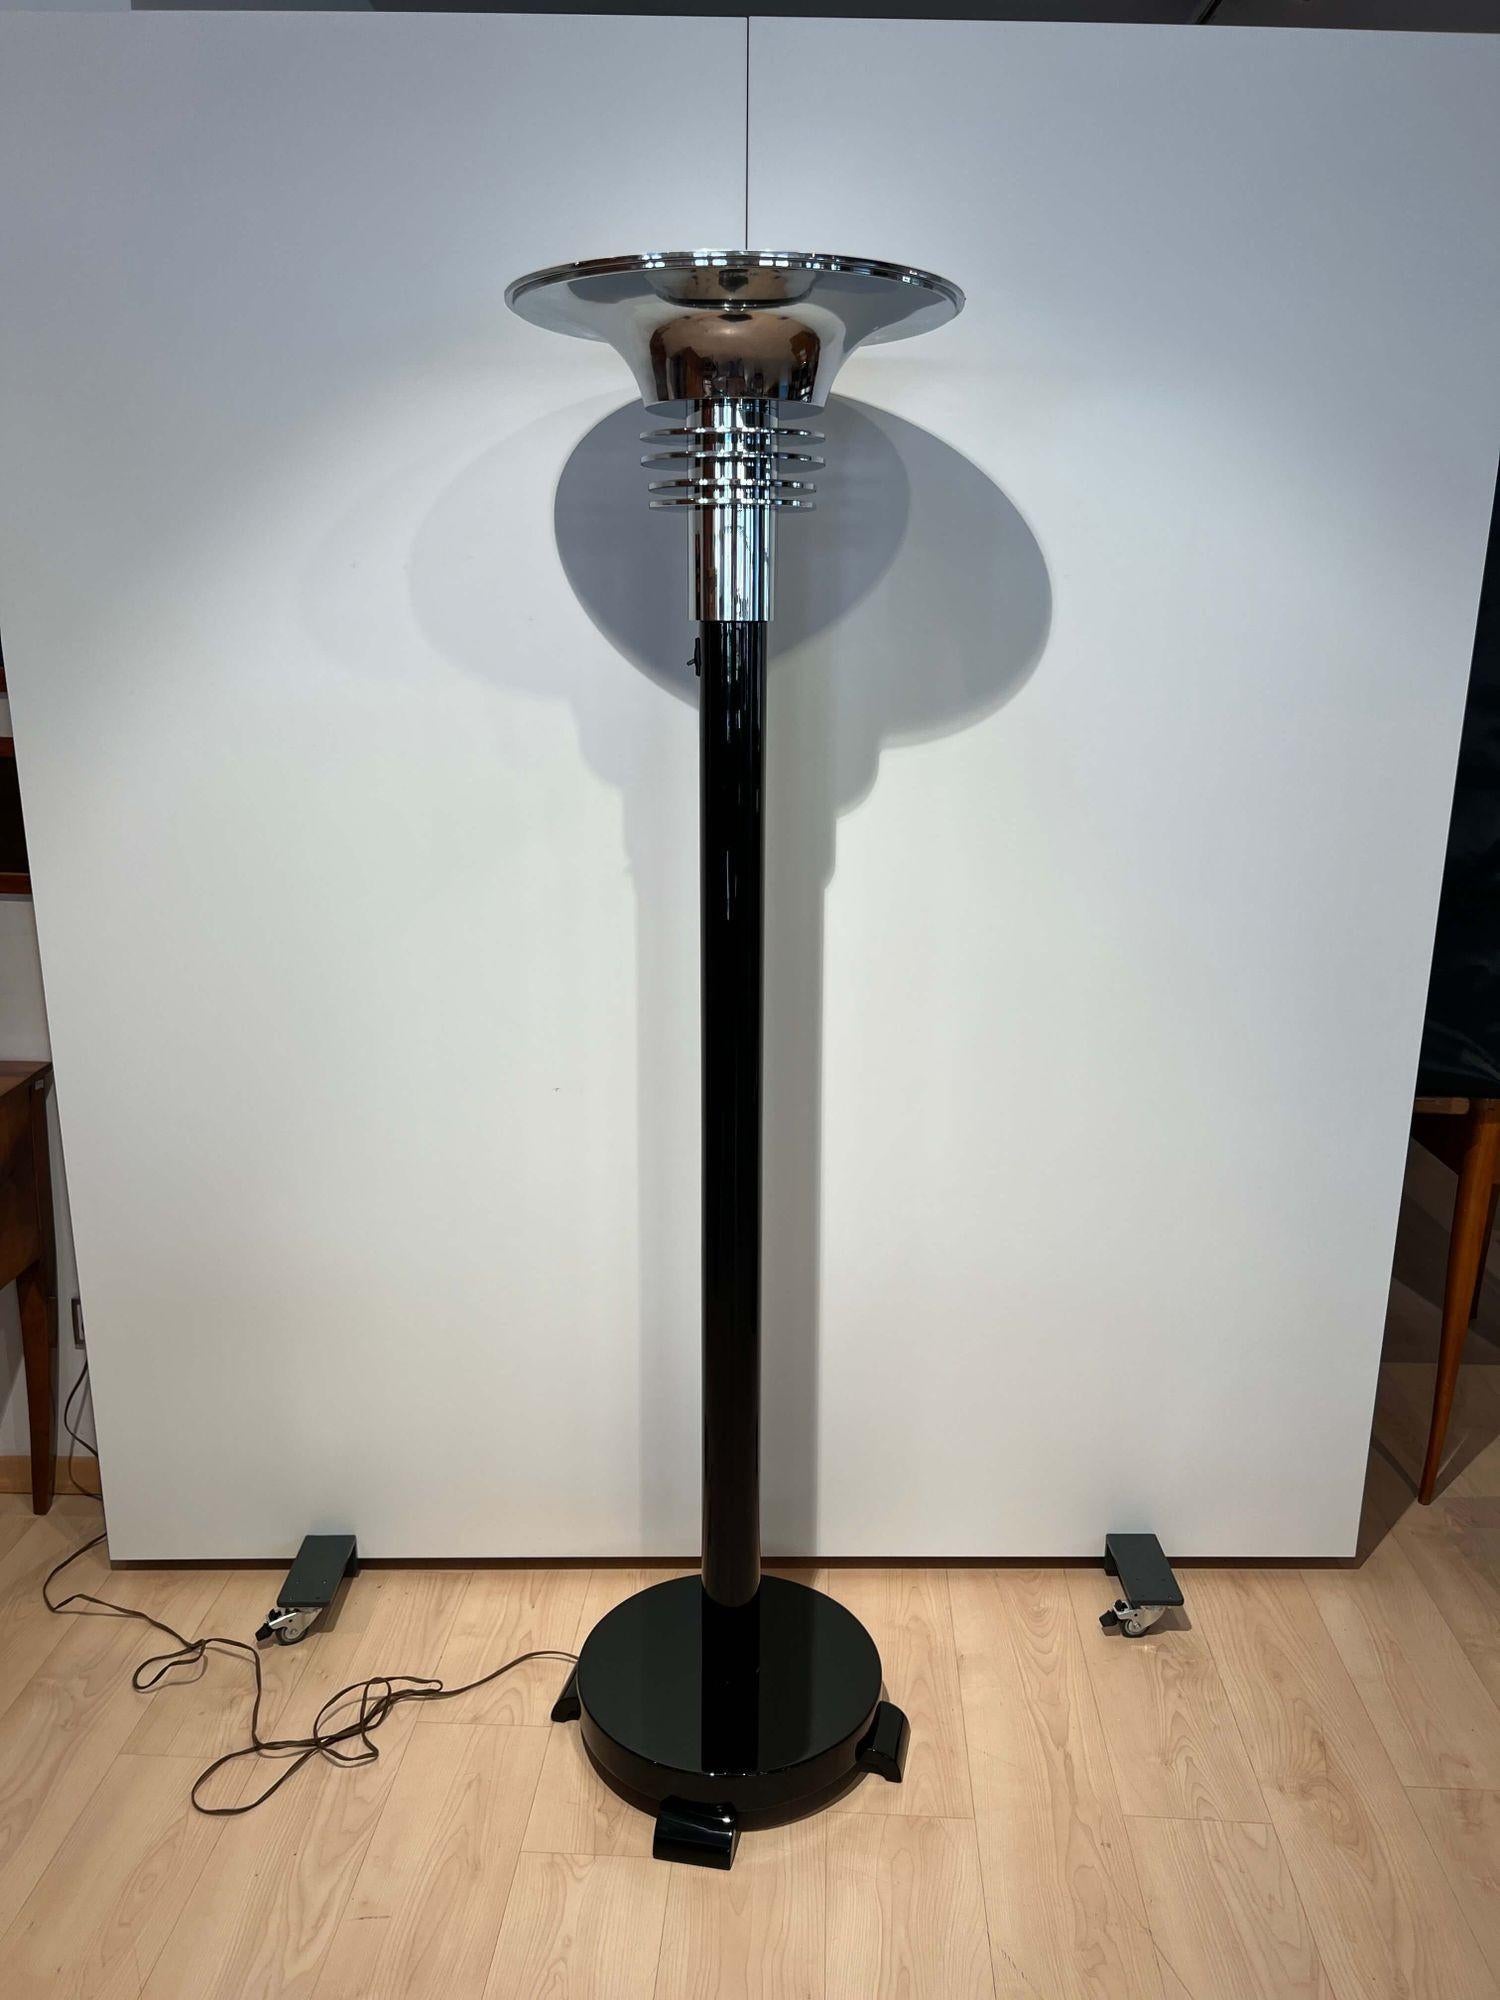 Art Deco floor lamp, Black Lacquer, Chrome, France circa 1930
 
Wooden pillar lacquered and polished in high-gloss black piano lacquer.
Chrome-plated shade and cuff with 4 four decorative rings.
Standing on a round base with 4 legs.
Switch to